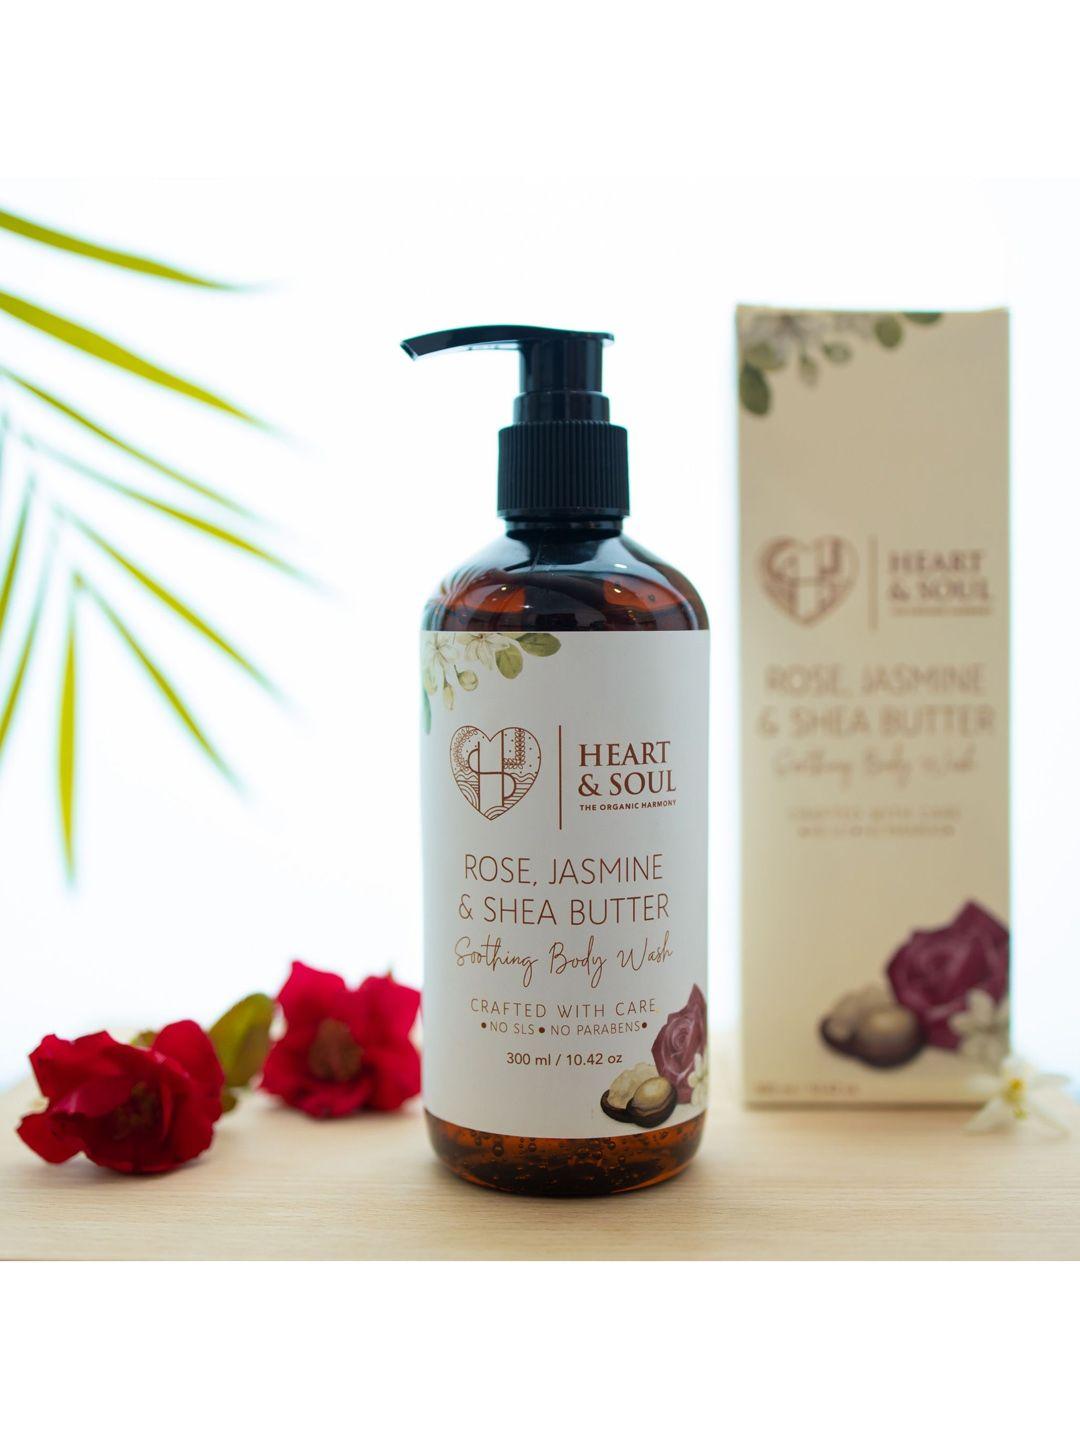 heart-and-soul-rose,-jasmine-and-shea-butter-soothing-body-wash-300ml